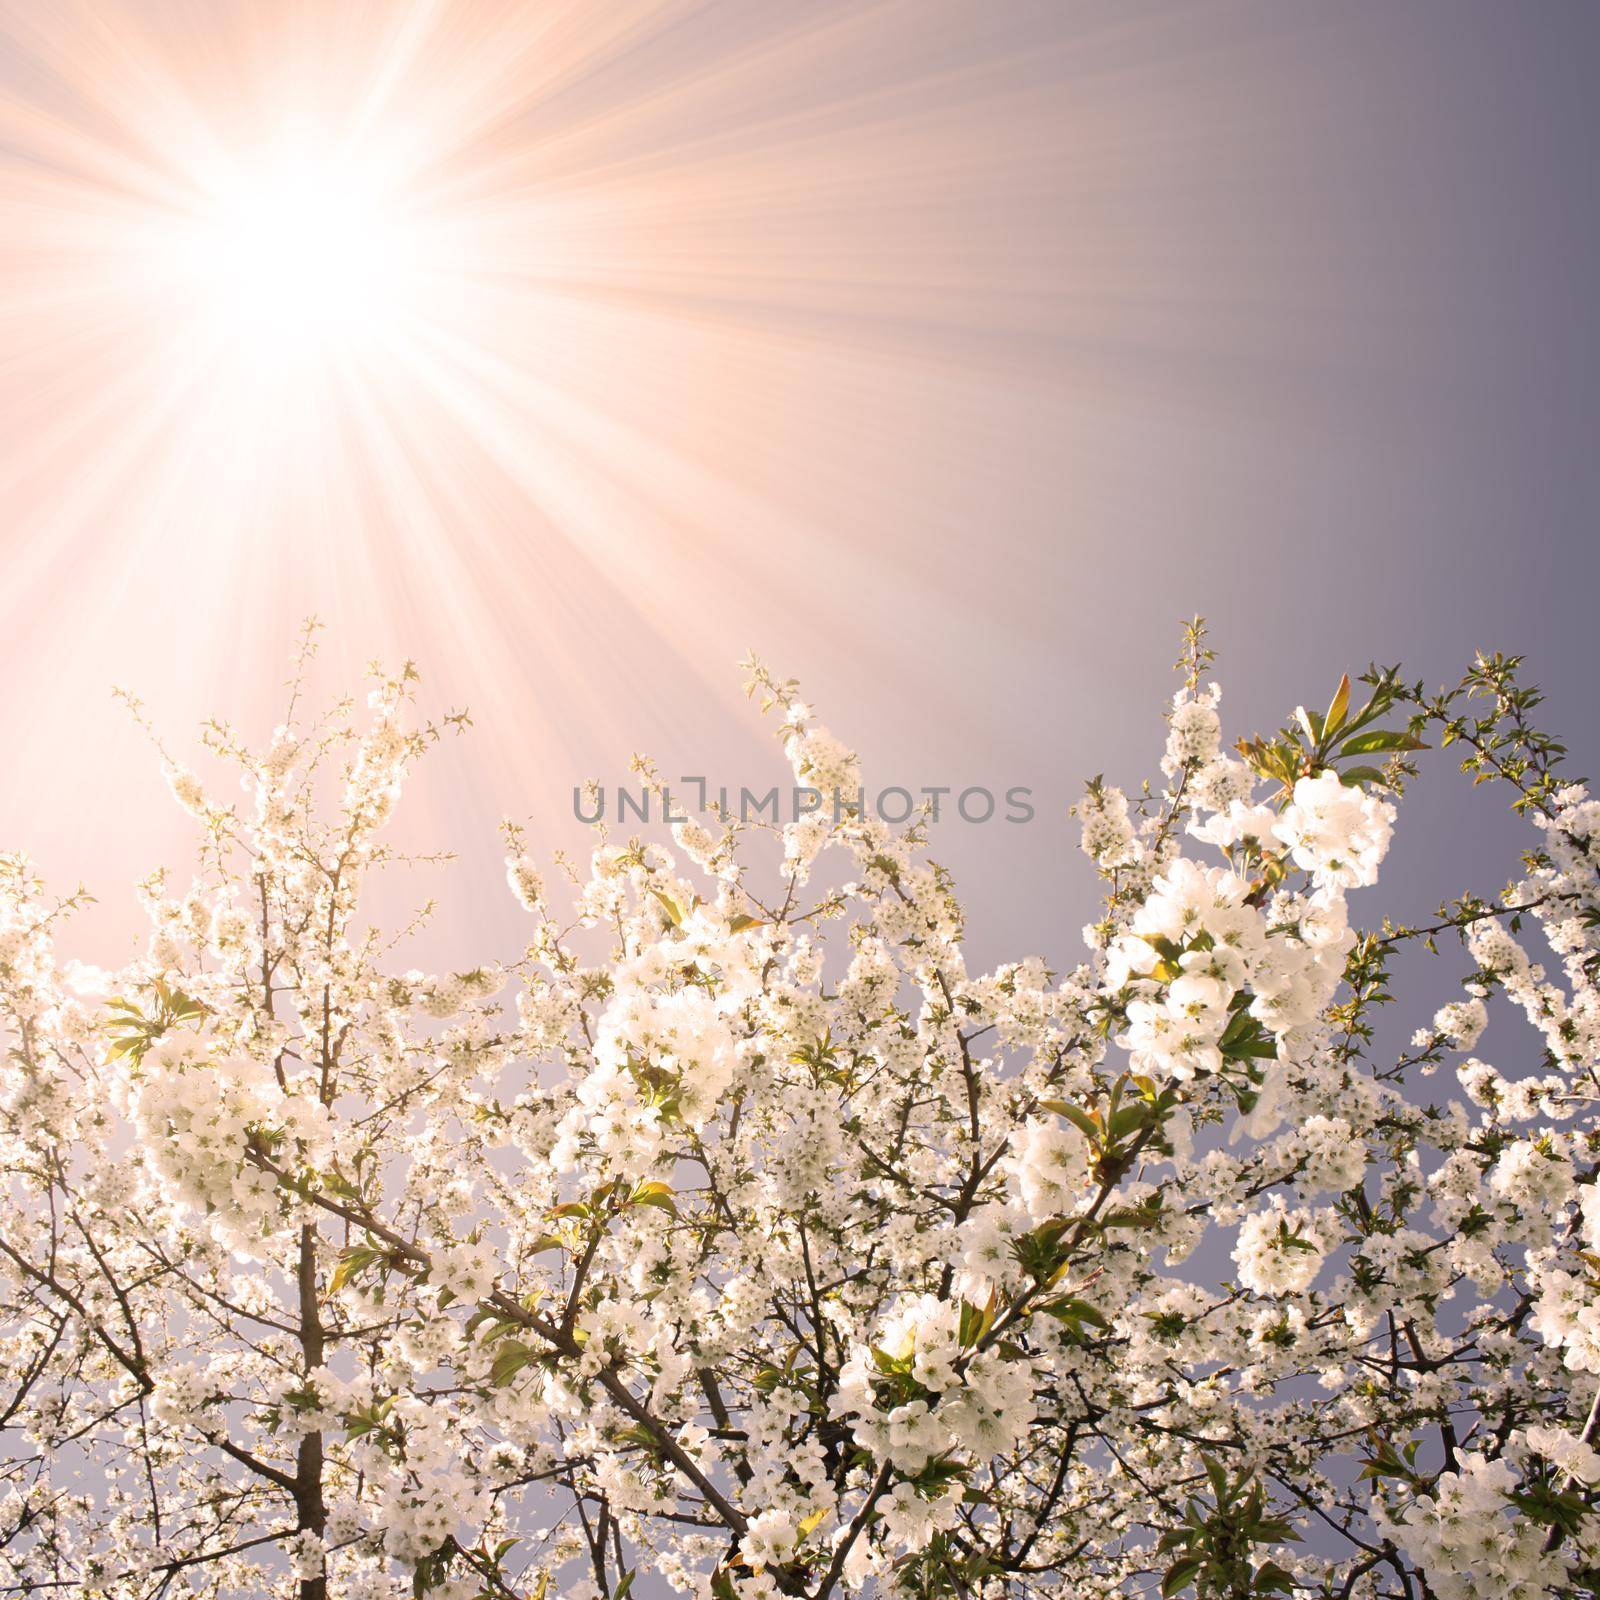 Beautiful nature scene with blooming flowers tree.